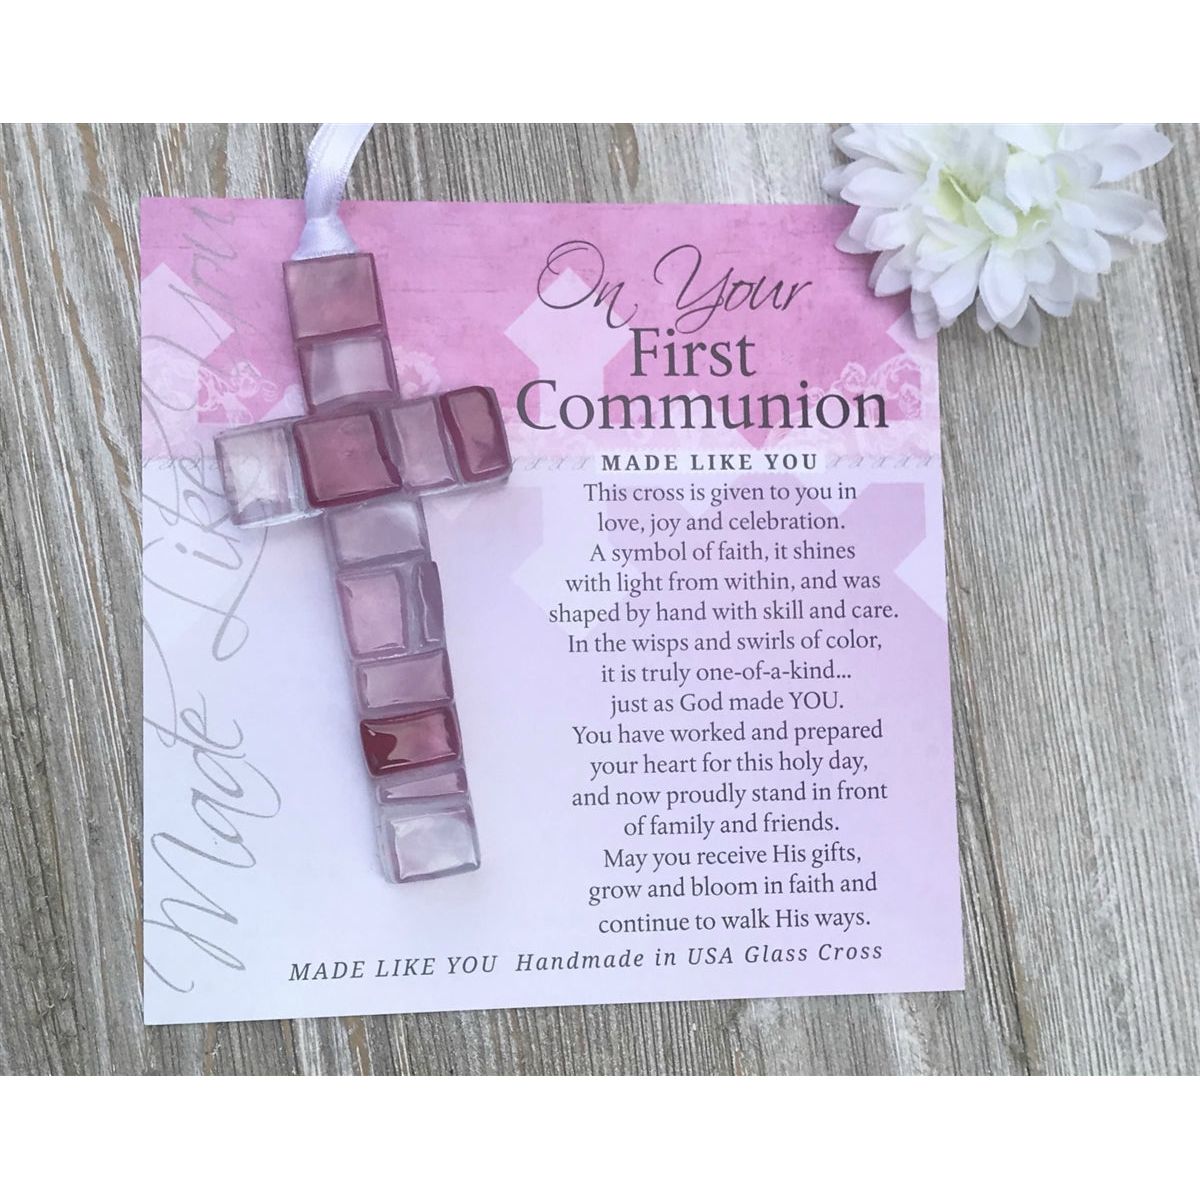 Pink Mosaic cross with shades of pink, white, and clear lying next to the &quot;On Your First Communion&quot; sentiment artwork.